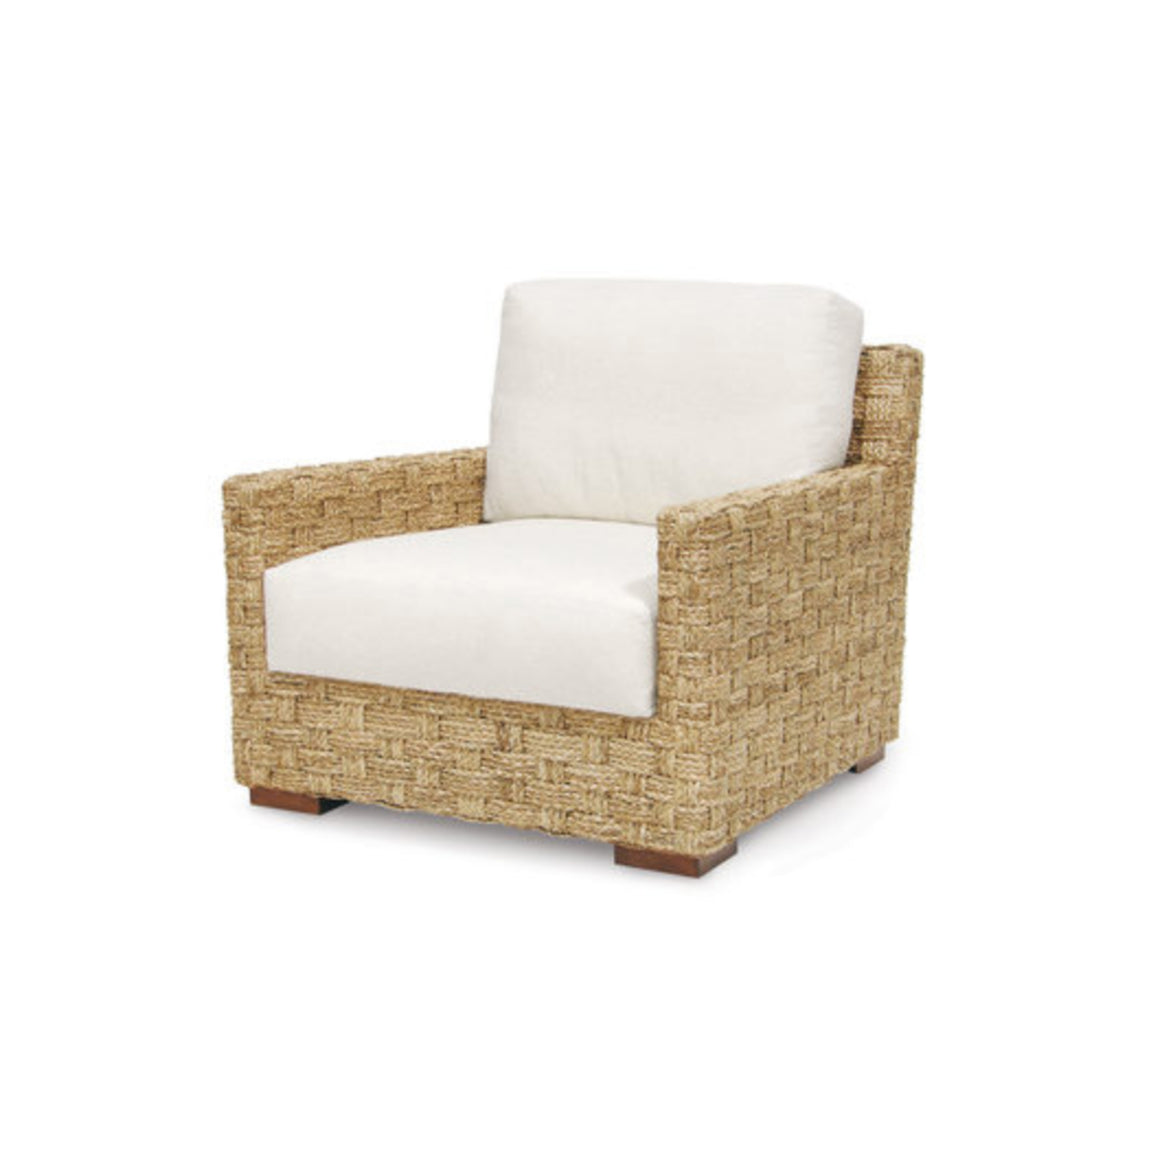 Spa Seagrass Lounge Chair with Upholstered Seat Cushions